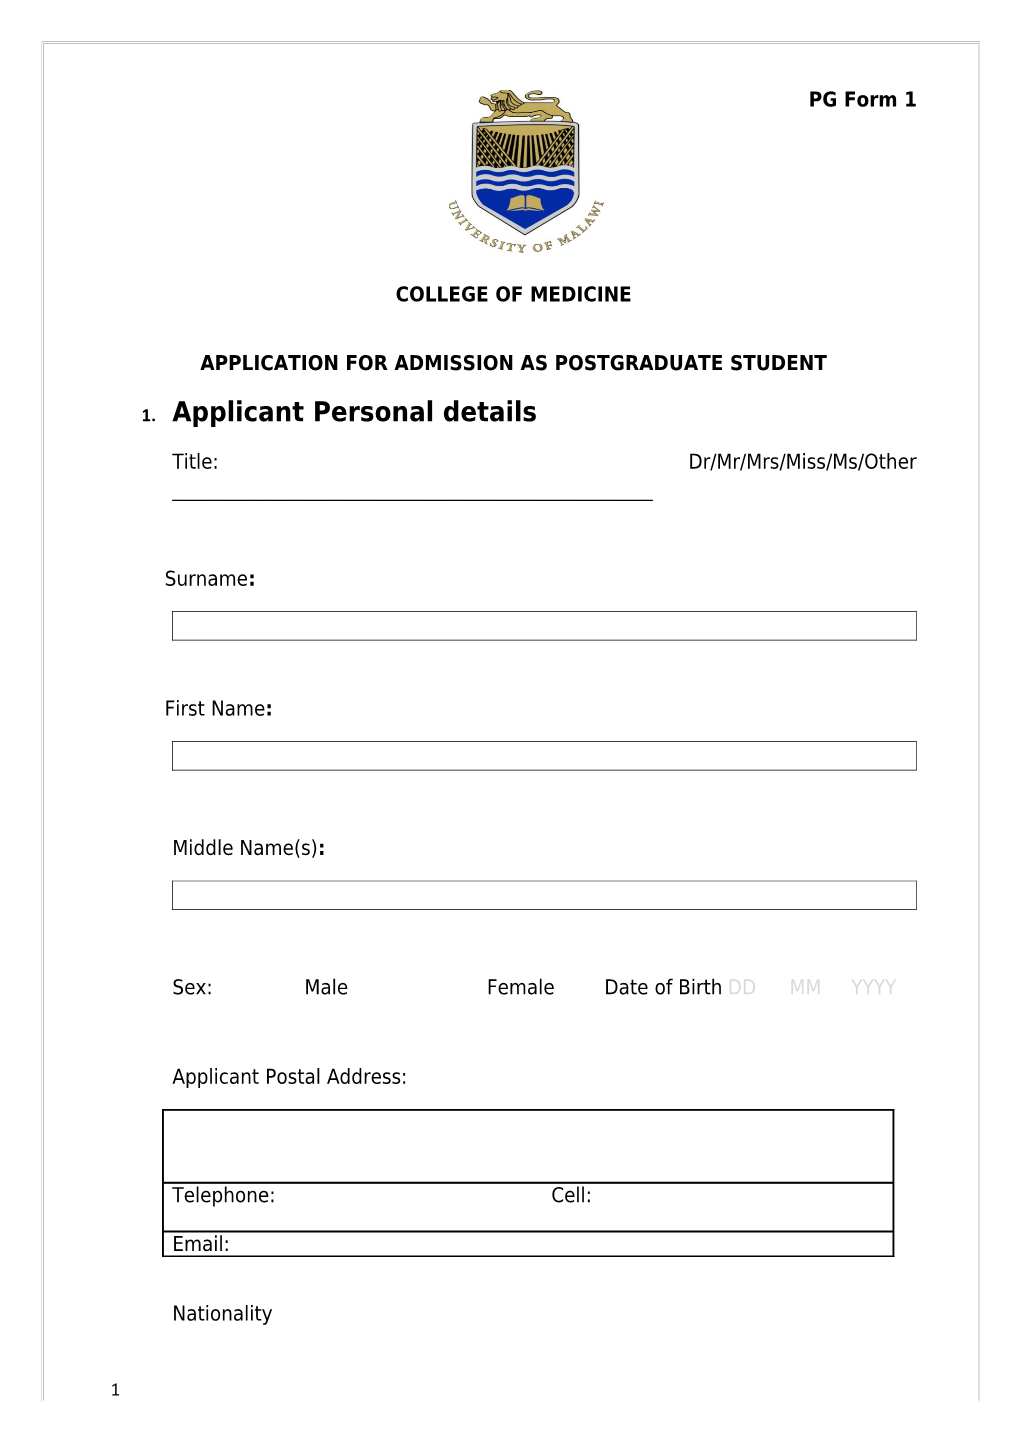 Application for Admission As Postgraduate Student